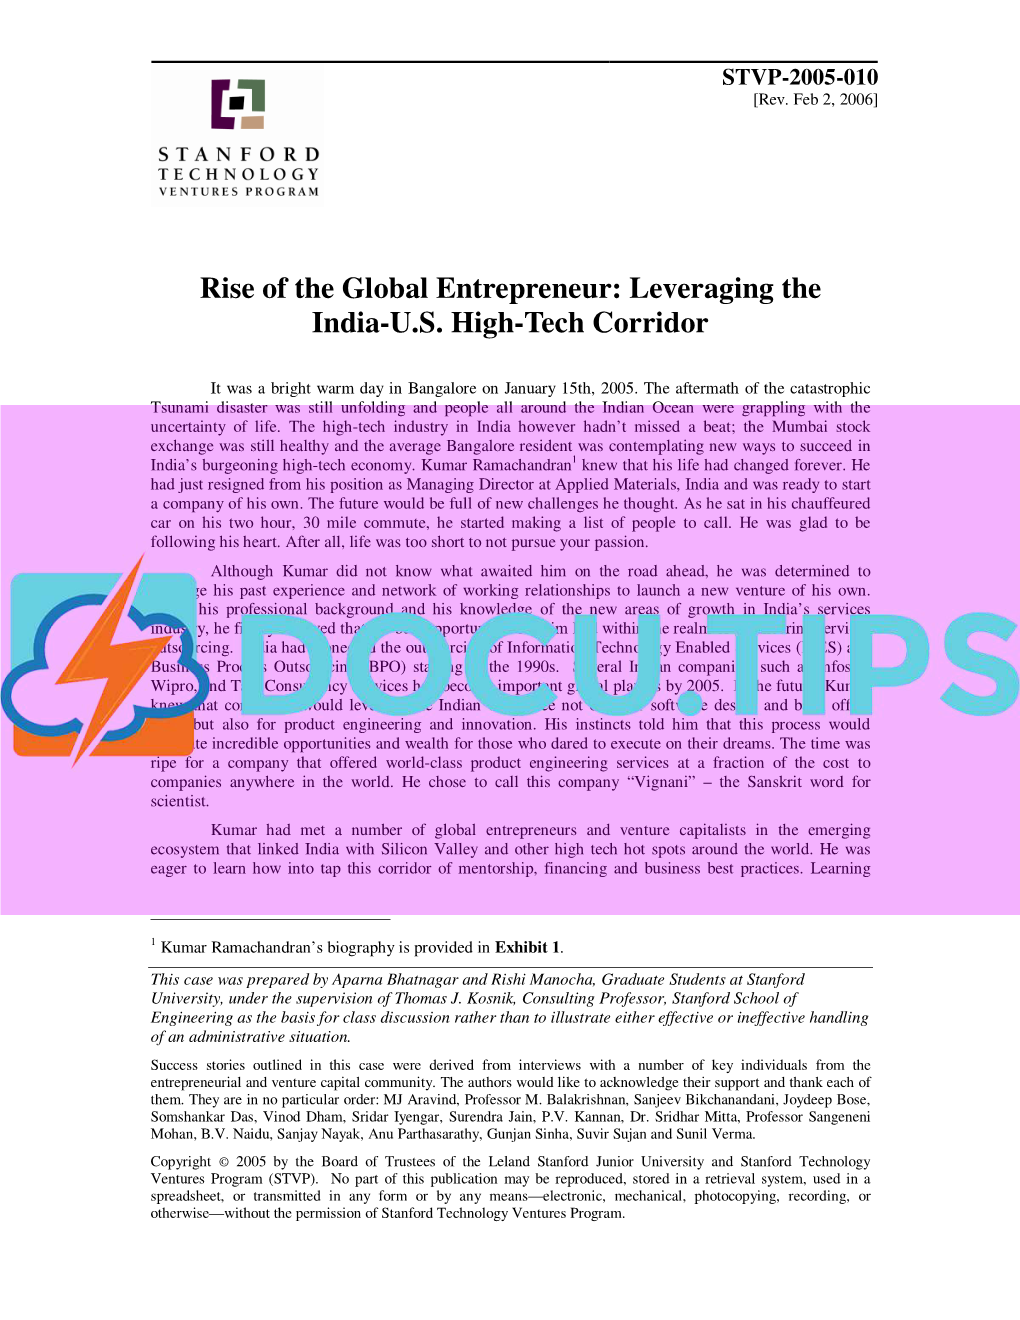 Rise of the Global Entrepreneur: Leveraging the India-U.S